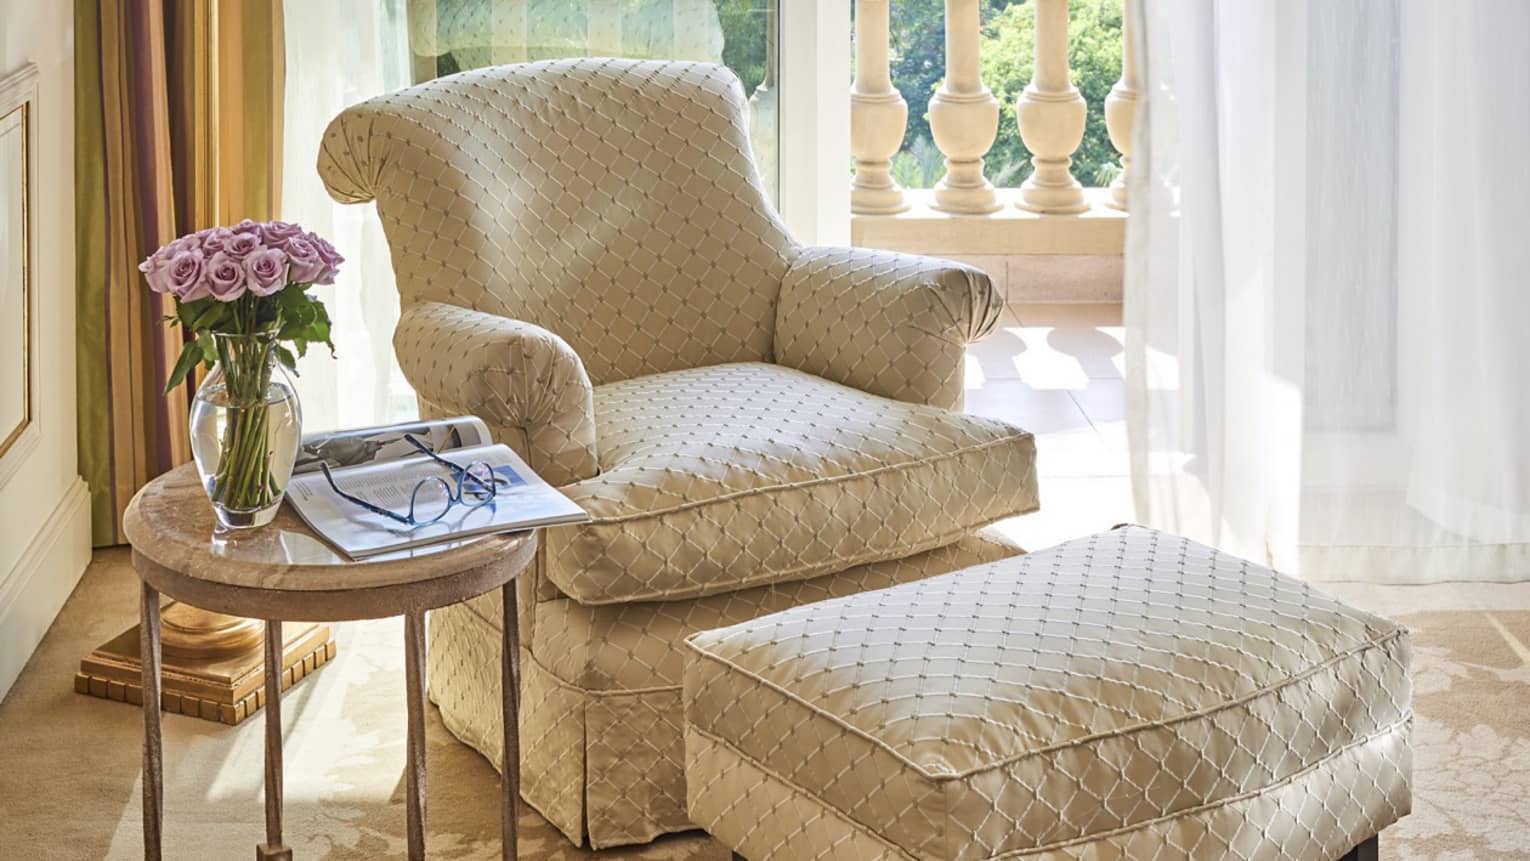 Beige and off white French-style chair with ottoman near window overlooking botanical gardens